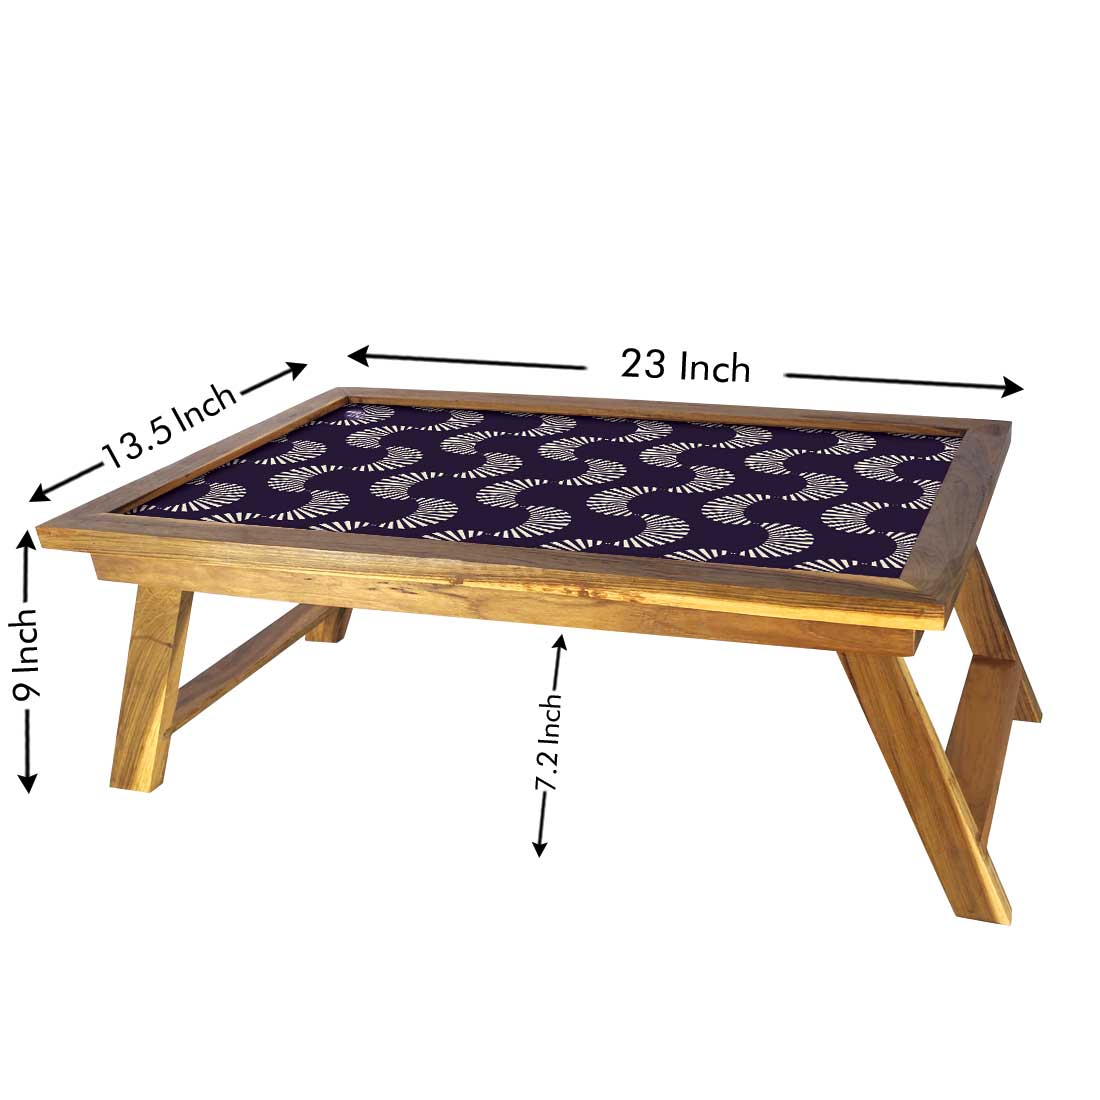 Modern Wooden Laptop Table for Home Bed Lapdesk Breakfast Table - Retro Nutcase